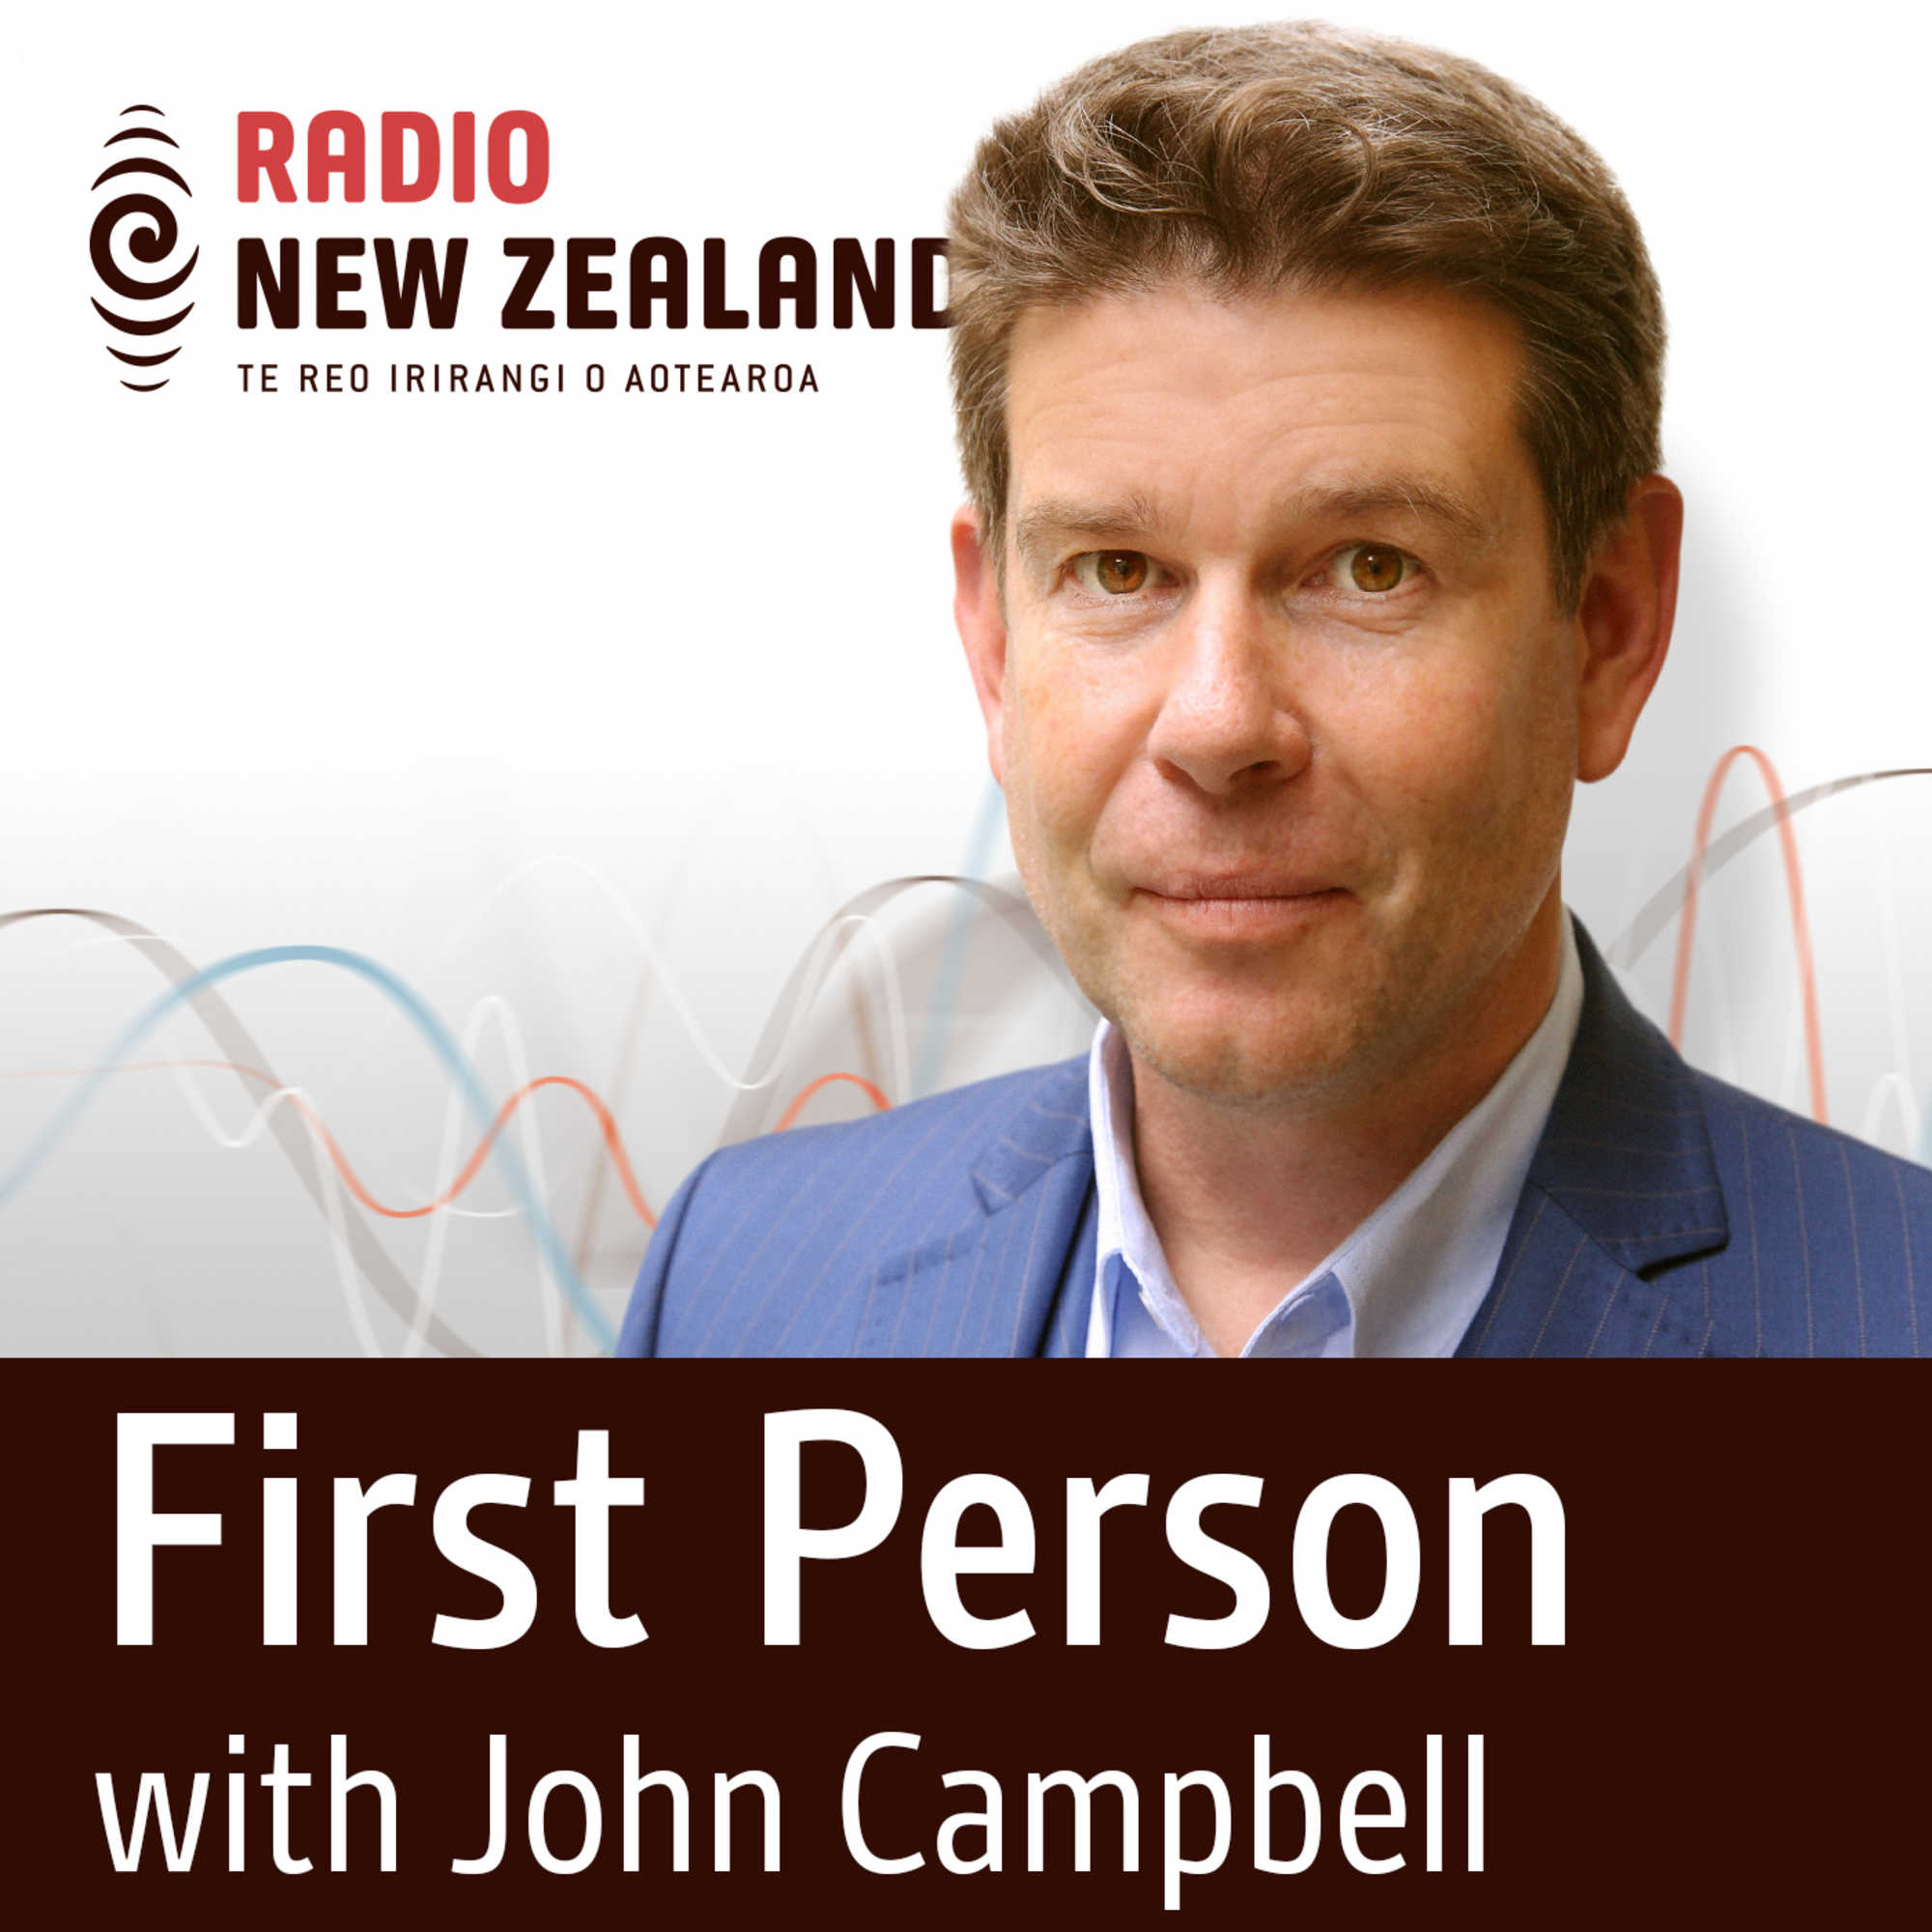 First Person with John Campbell: 'It's not about money at all'